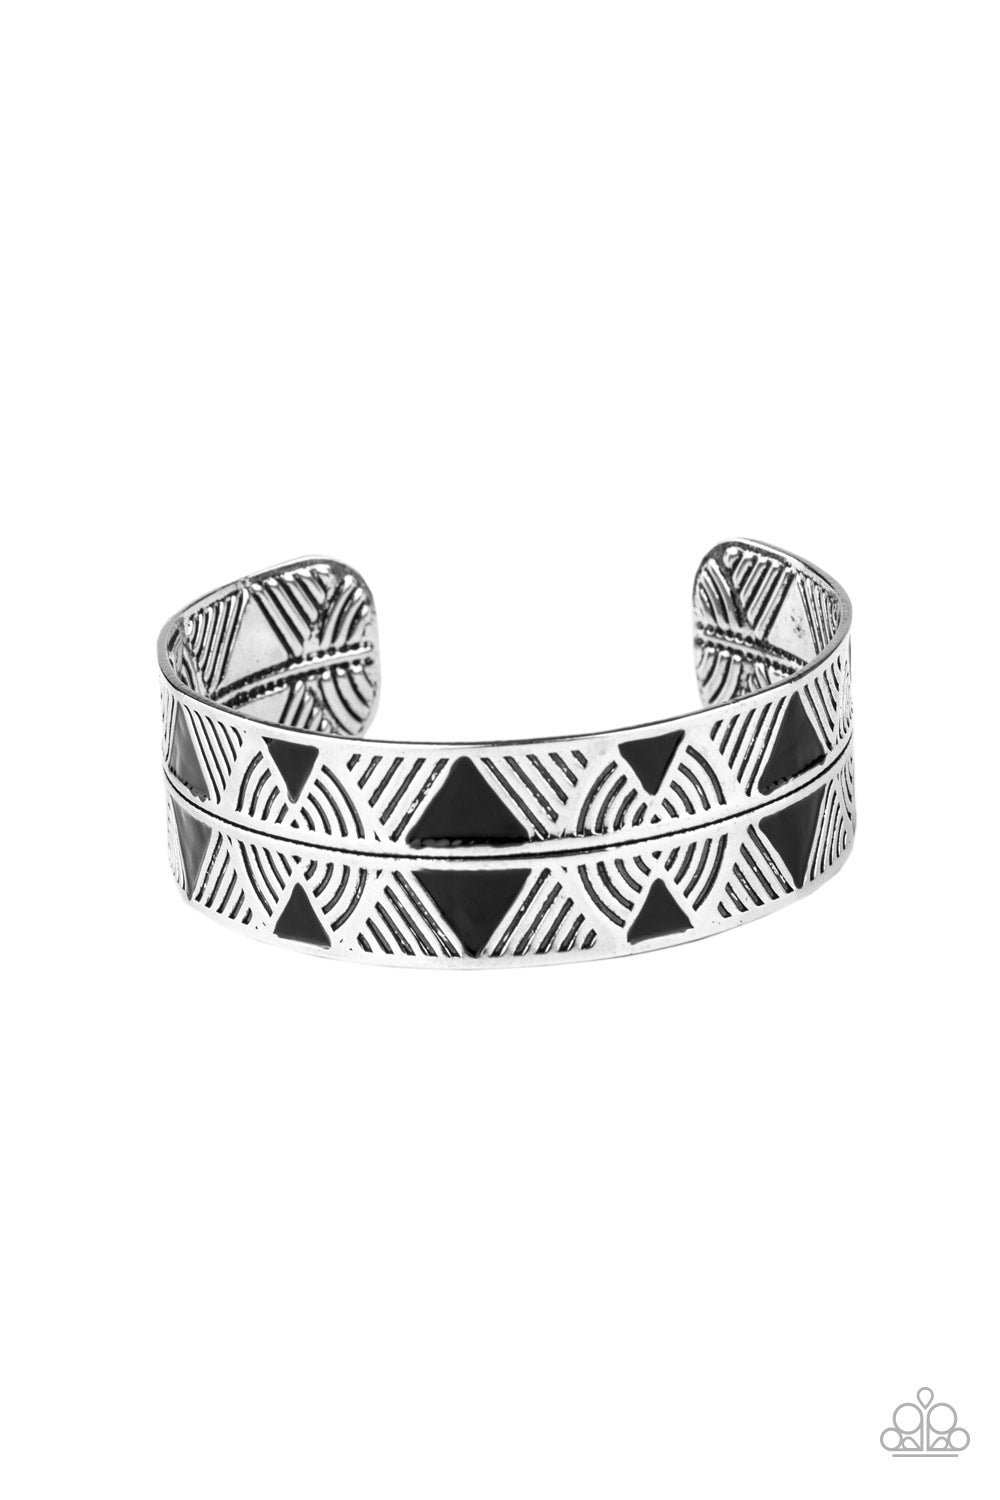 Paparazzi Accessories - Painted in shiny black triangular accents, a thick silver cuff embossed in a dizzying linear pattern has been spliced down the center for a tactile finish.